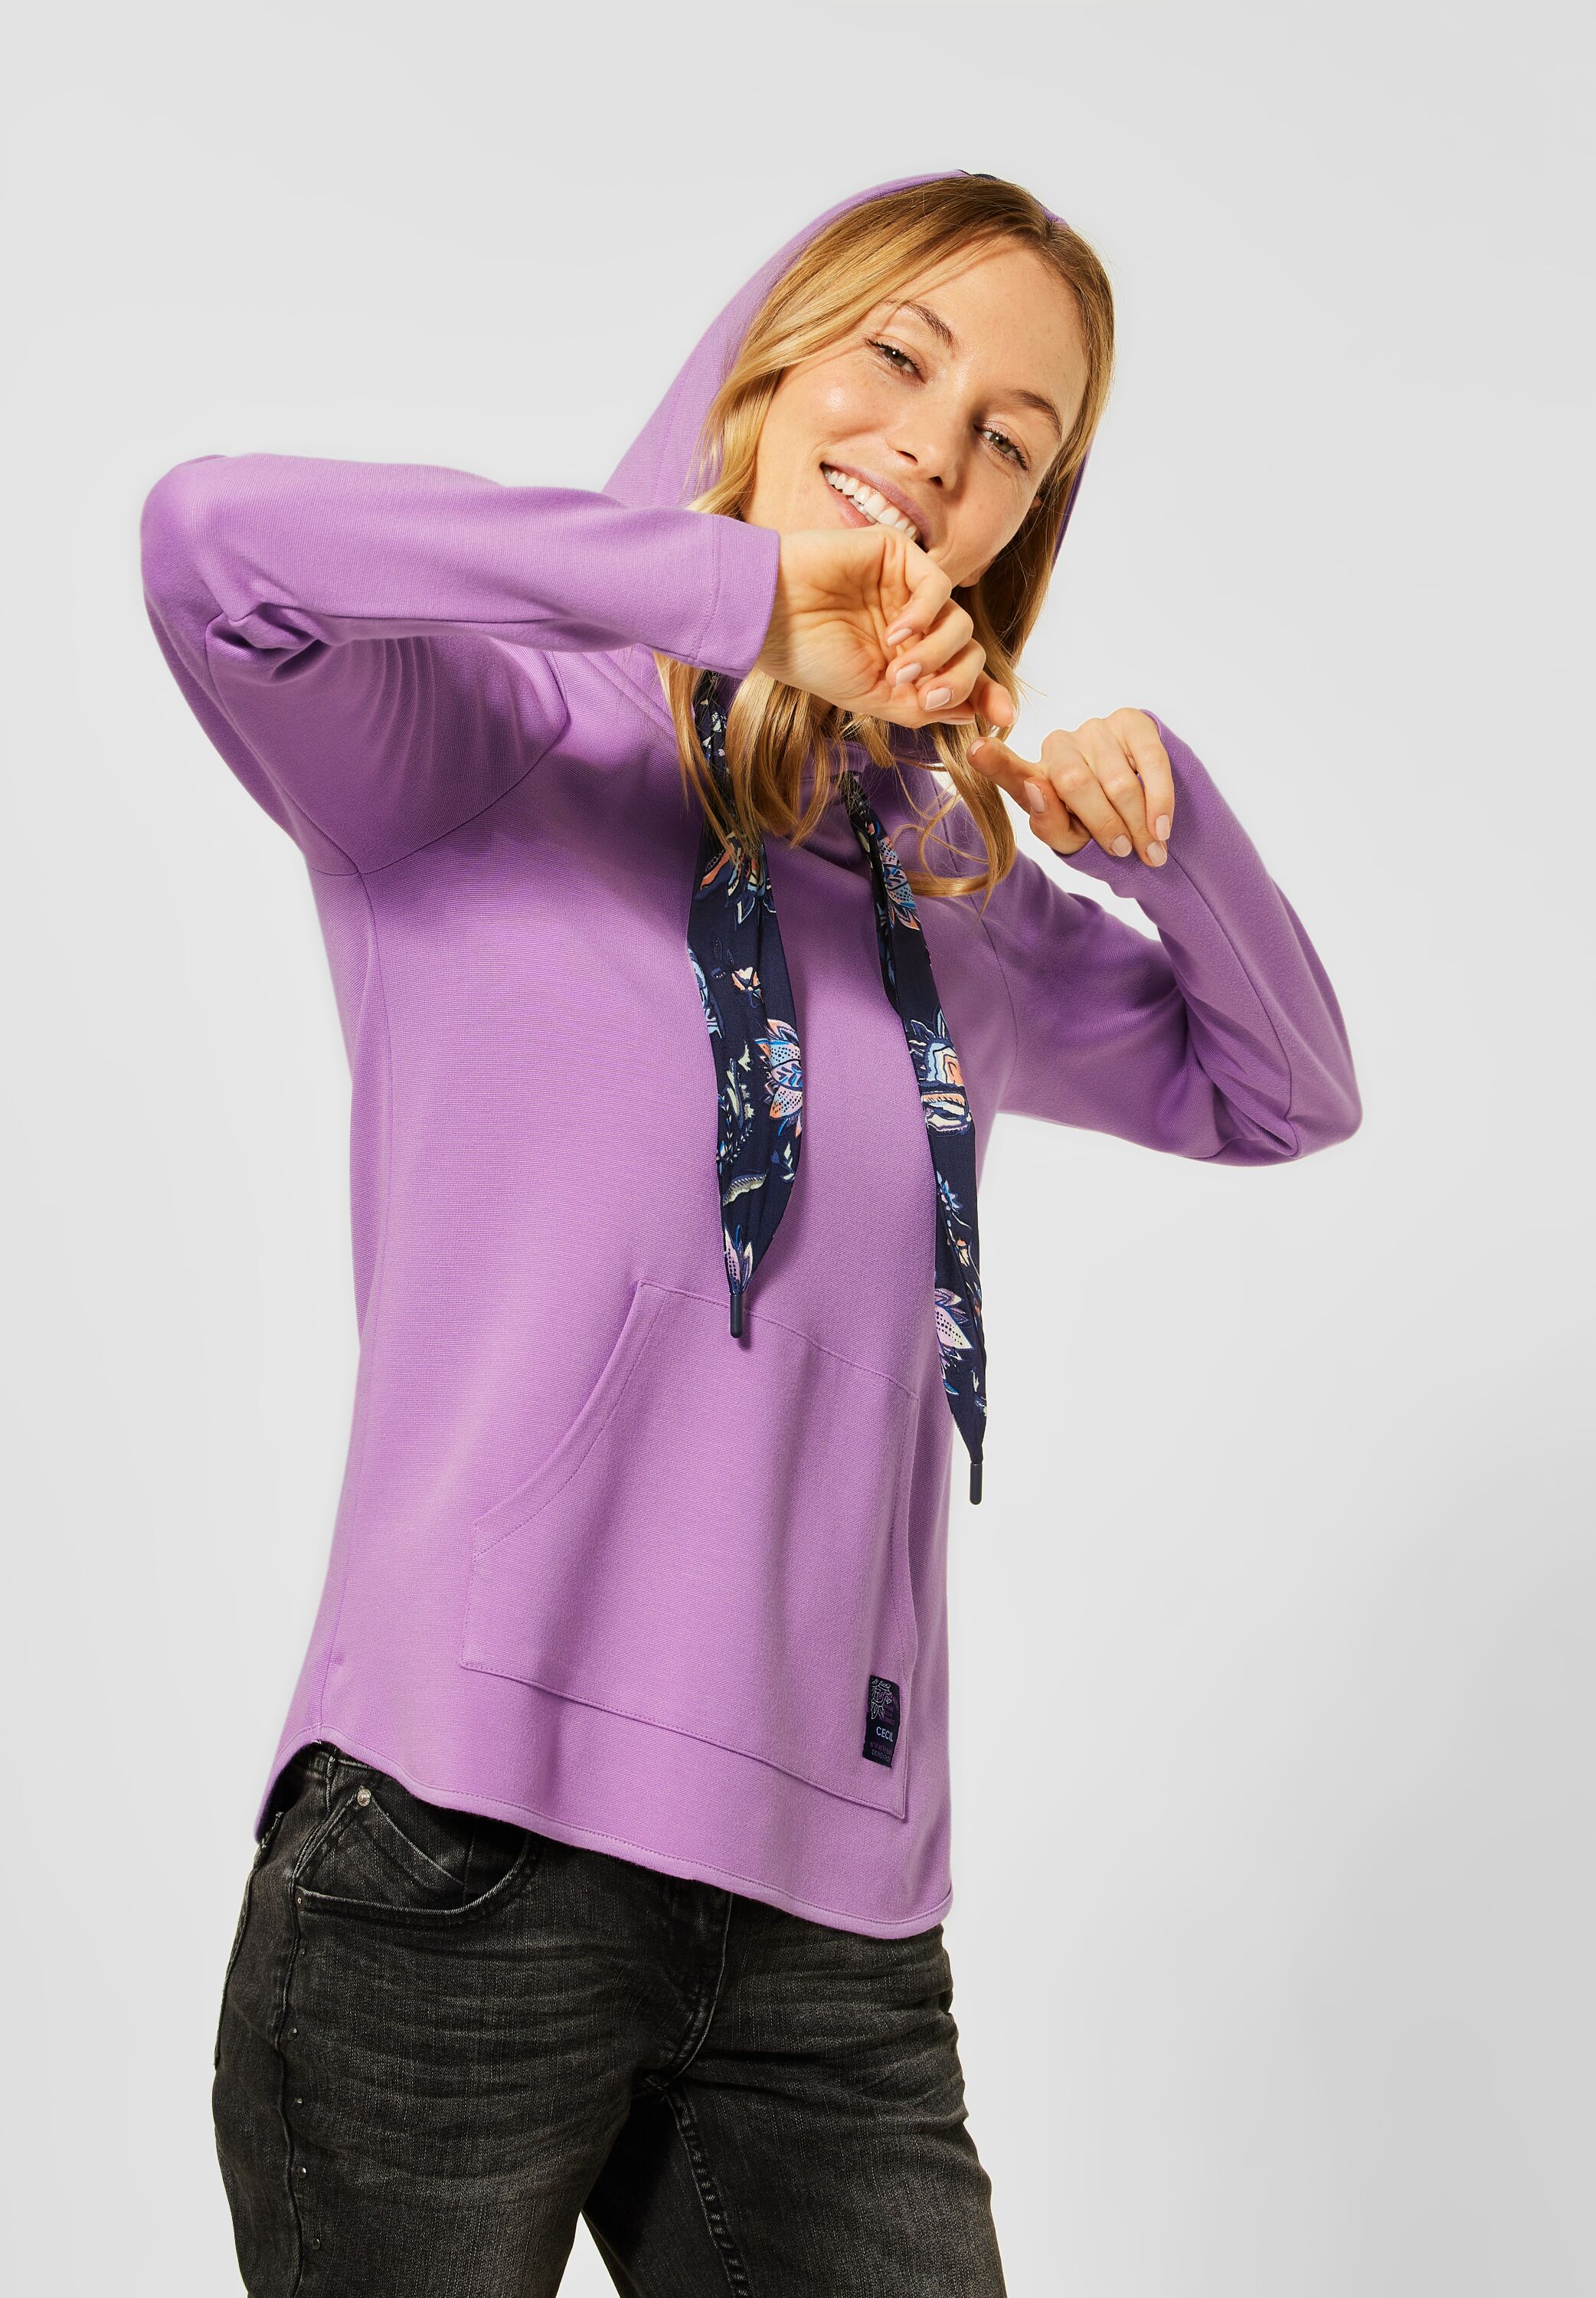 CECIL Shirt in B315803-12746 Mode - CONCEPT Soft Violet